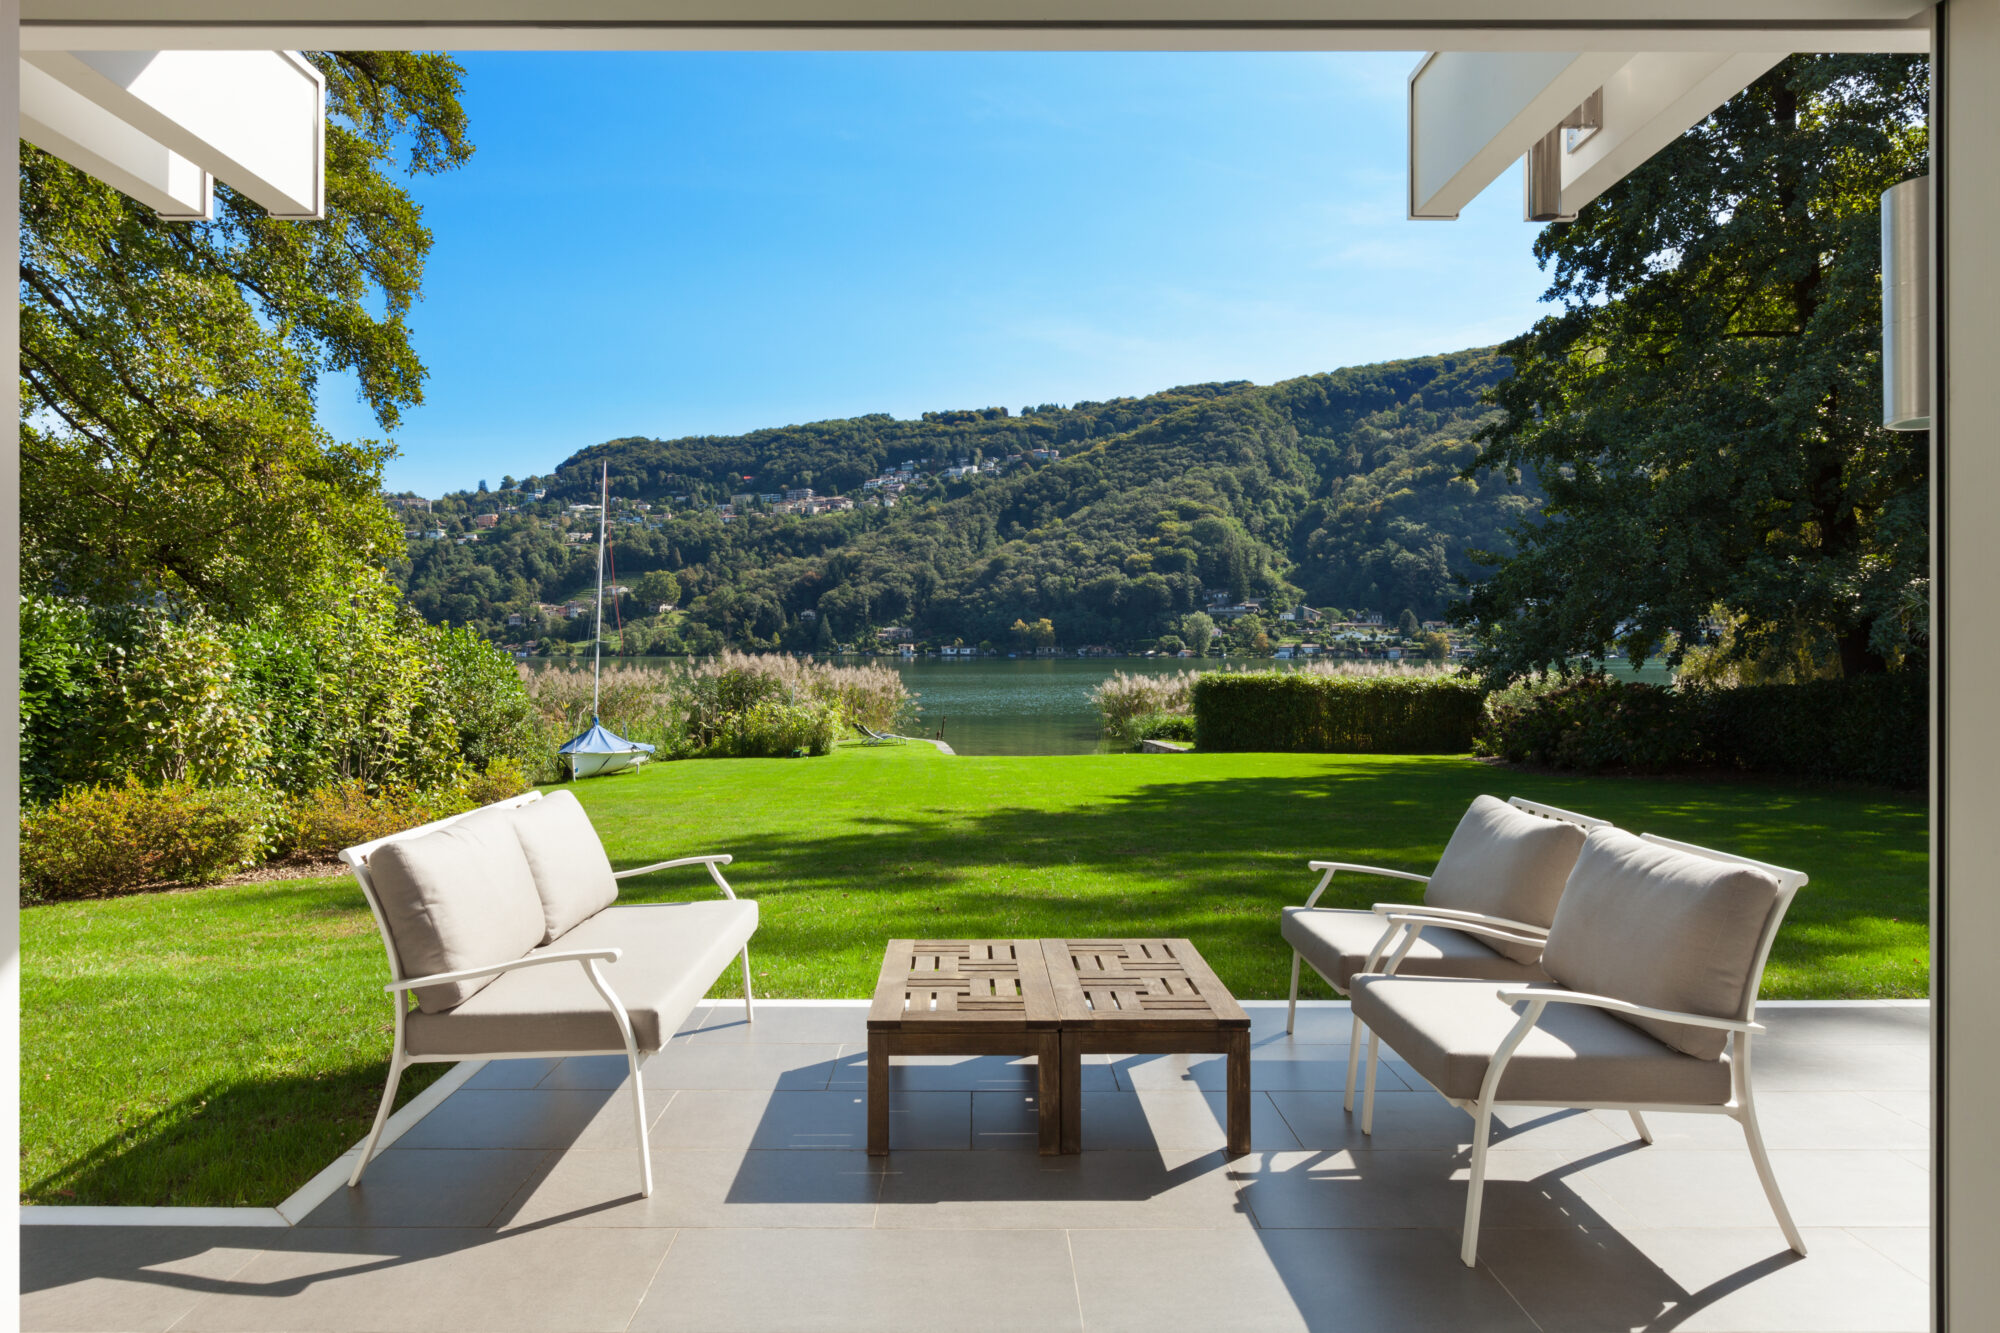 Serene garden patio overlooking a lake, ideal for using a weed eater before relaxing.